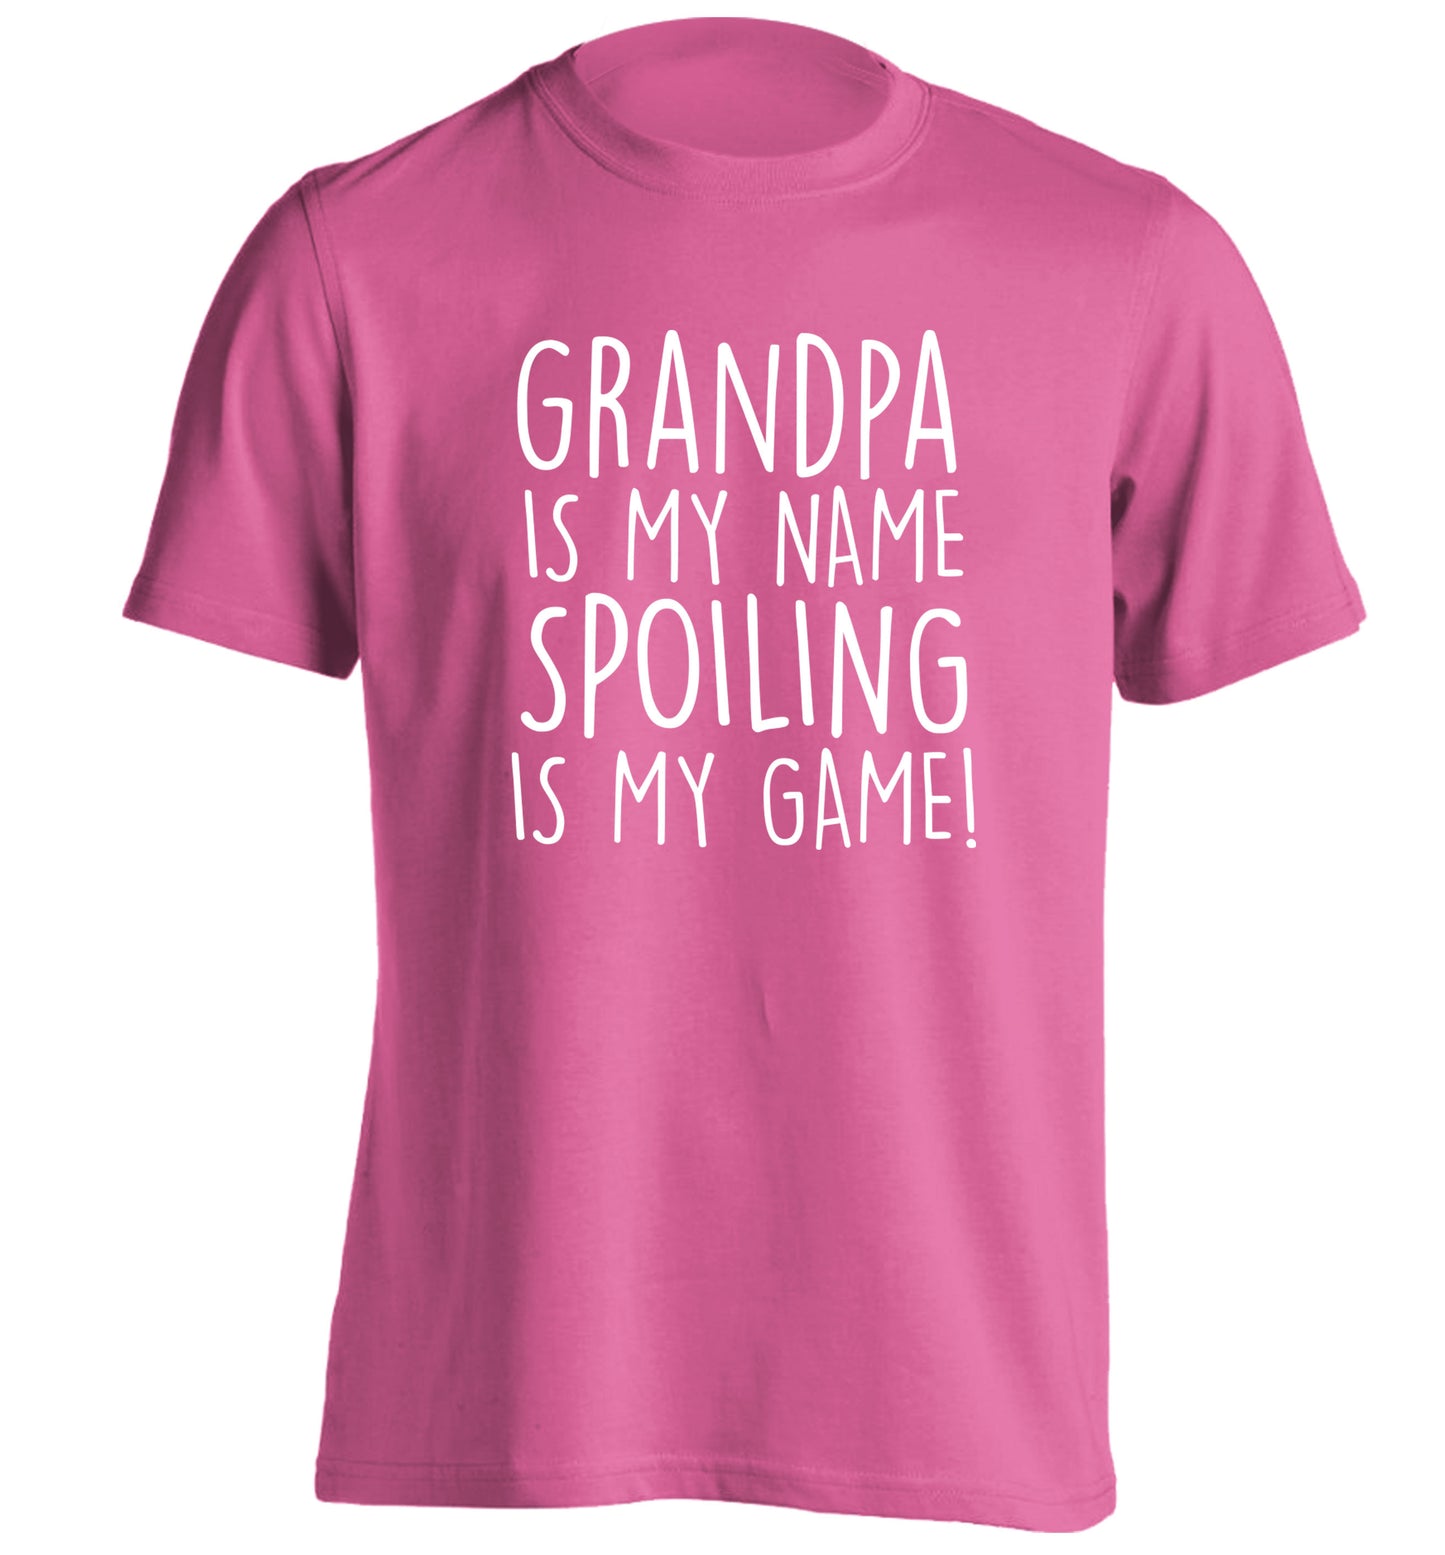 Grandpa is my name, spoiling is my game adults unisex pink Tshirt 2XL